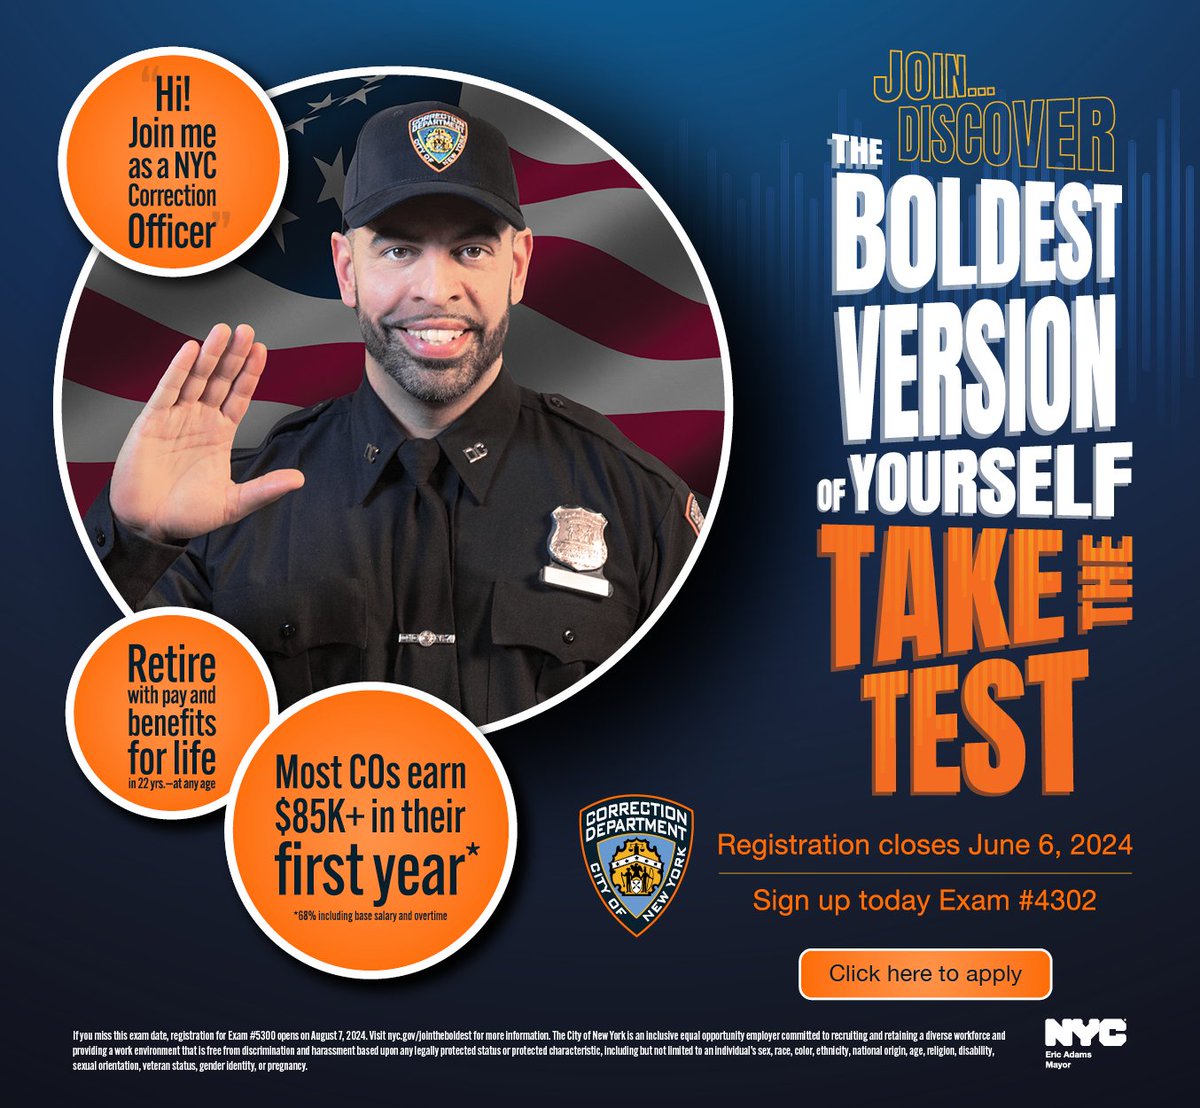 Want to join New York's Boldest? The exam period is open from May 1 to June 6. See flyer for details. Register for the exam here: a856-exams.nyc.gov/OASysWeb/exams